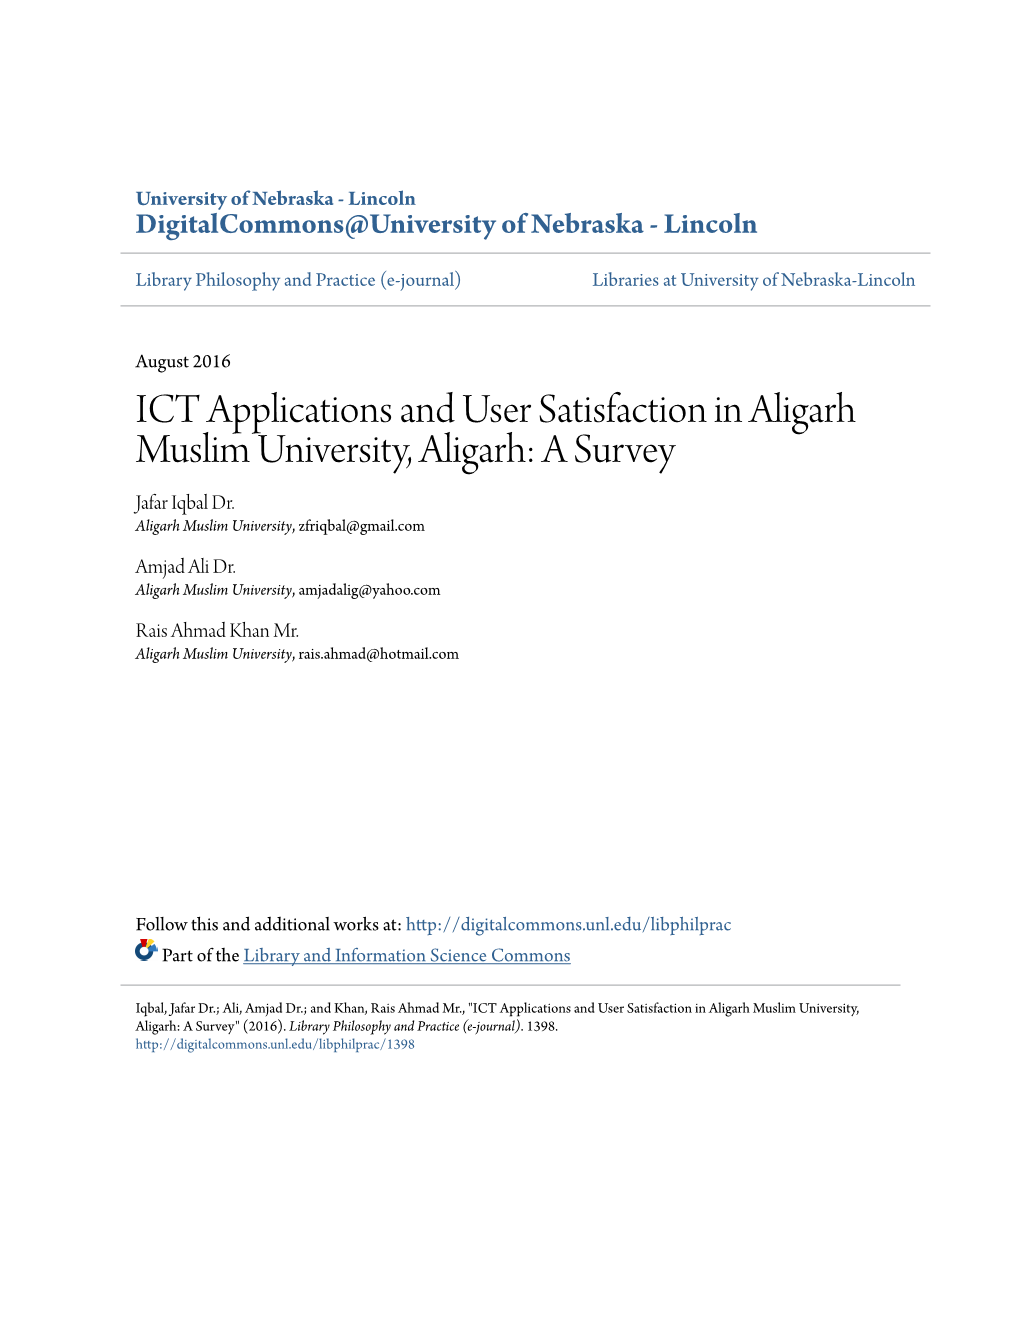 ICT Applications and User Satisfaction in Aligarh Muslim University, Aligarh: a Survey Jafar Iqbal Dr